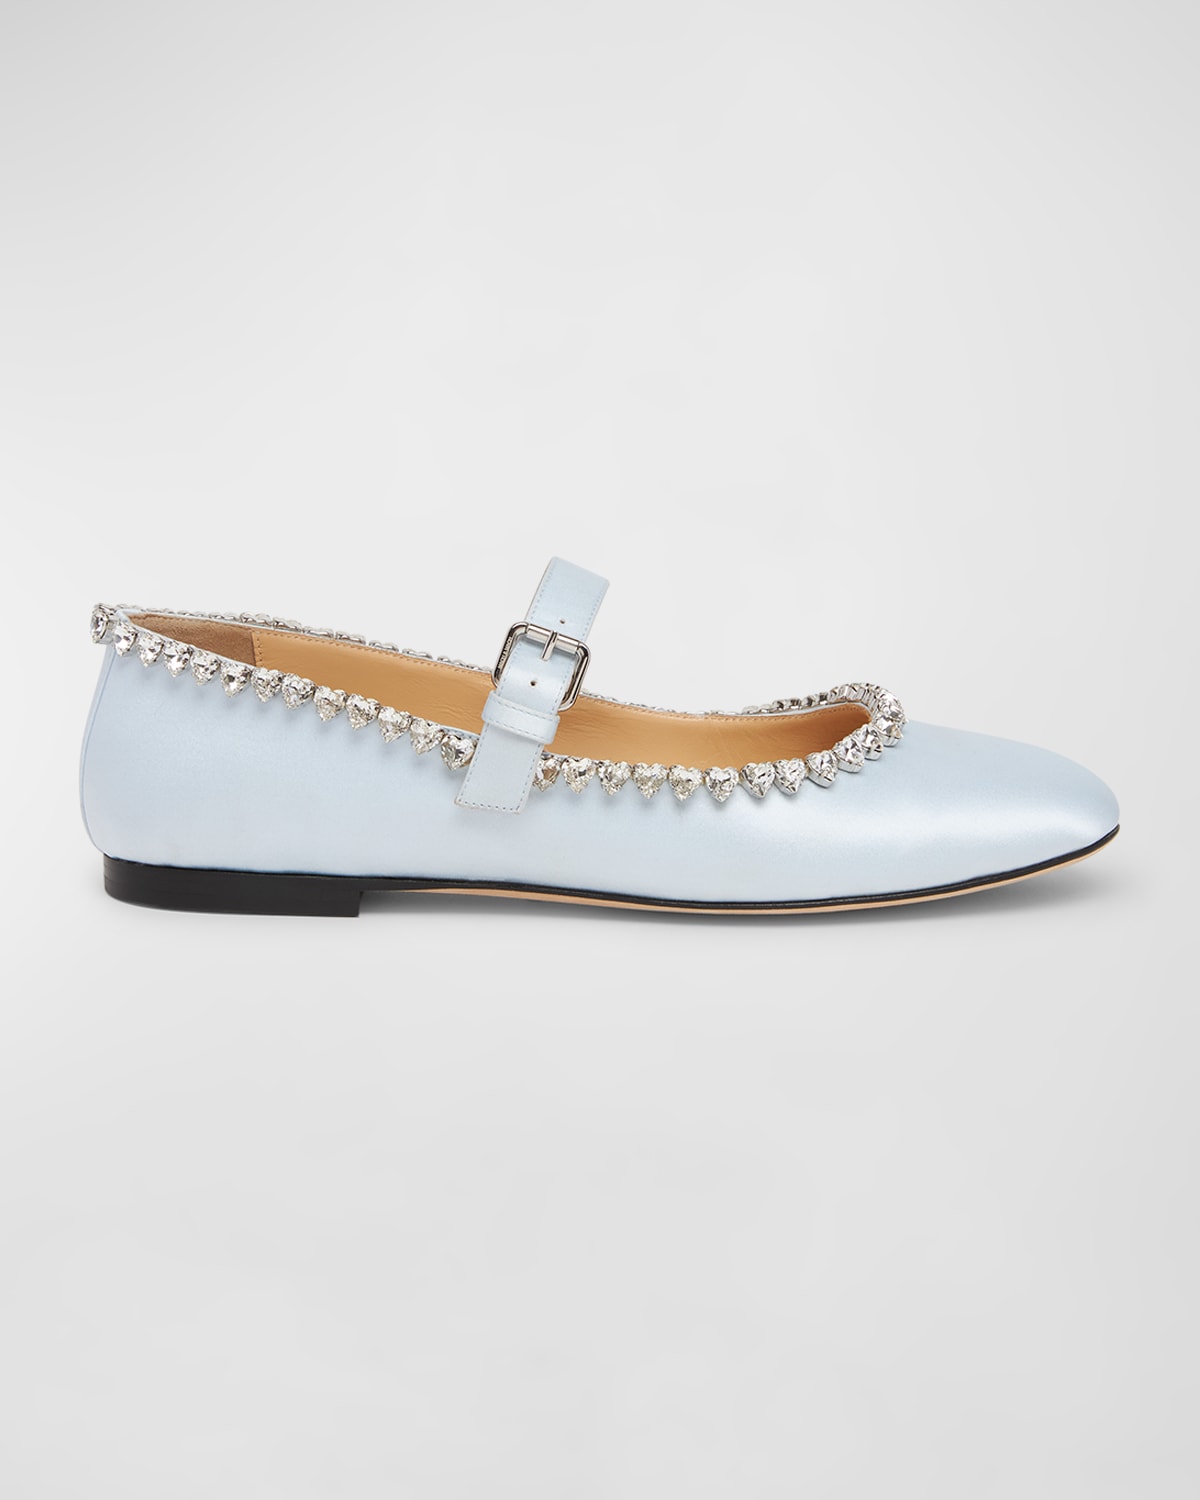 Mach & Mach Audrey Crystal-embellished Ballerina Shoes In Pearl White